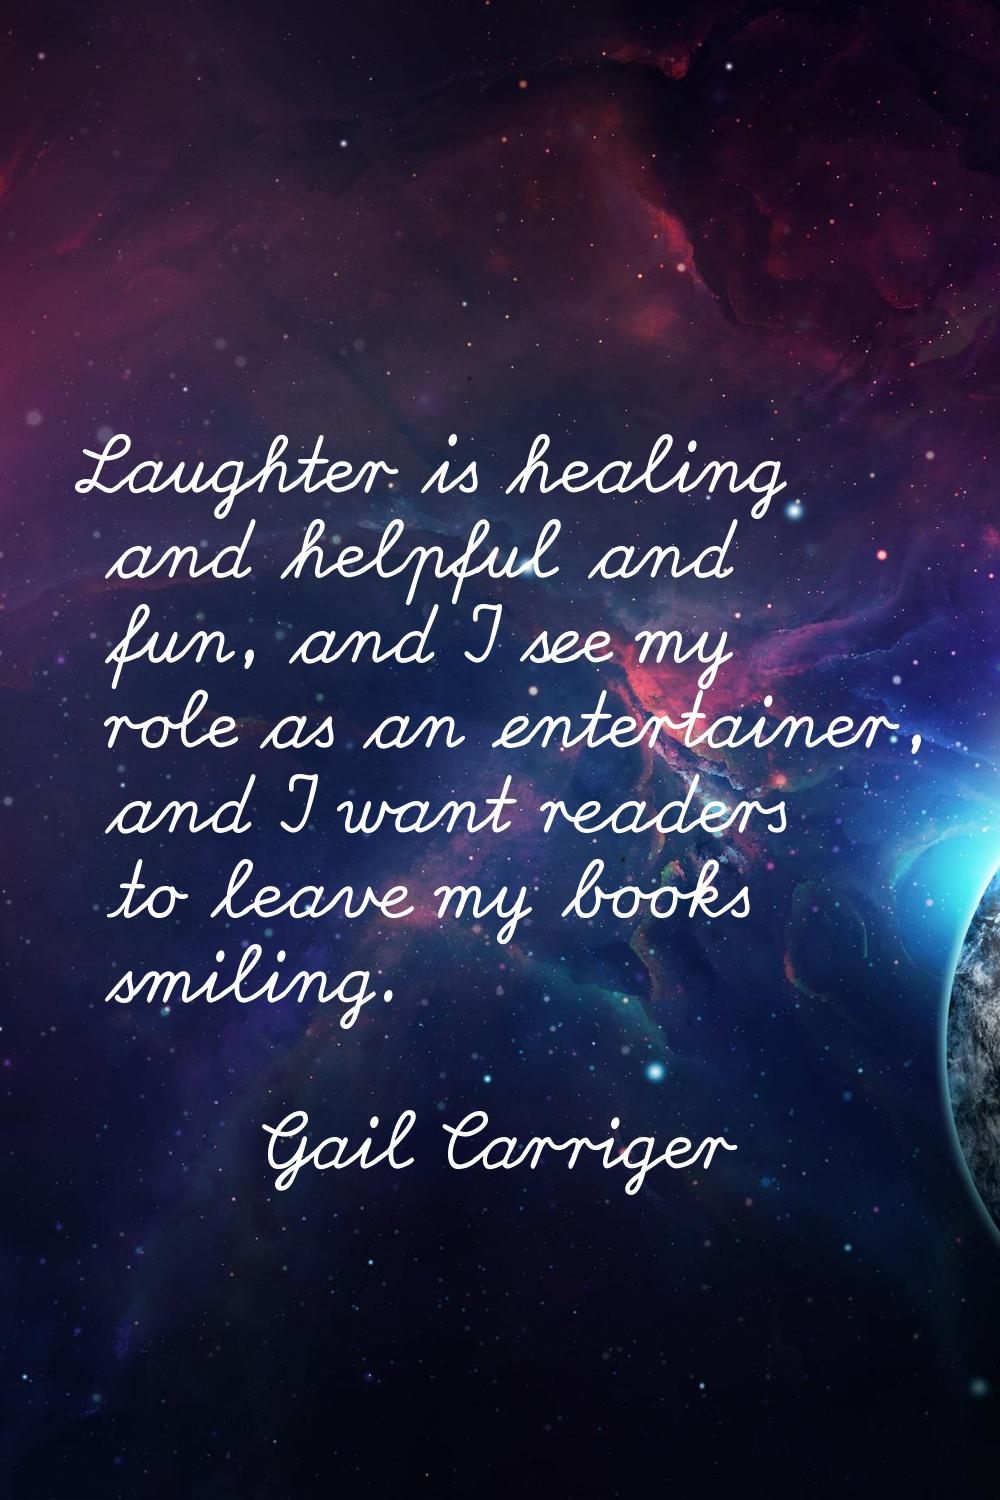 Laughter is healing and helpful and fun, and I see my role as an entertainer, and I want readers to